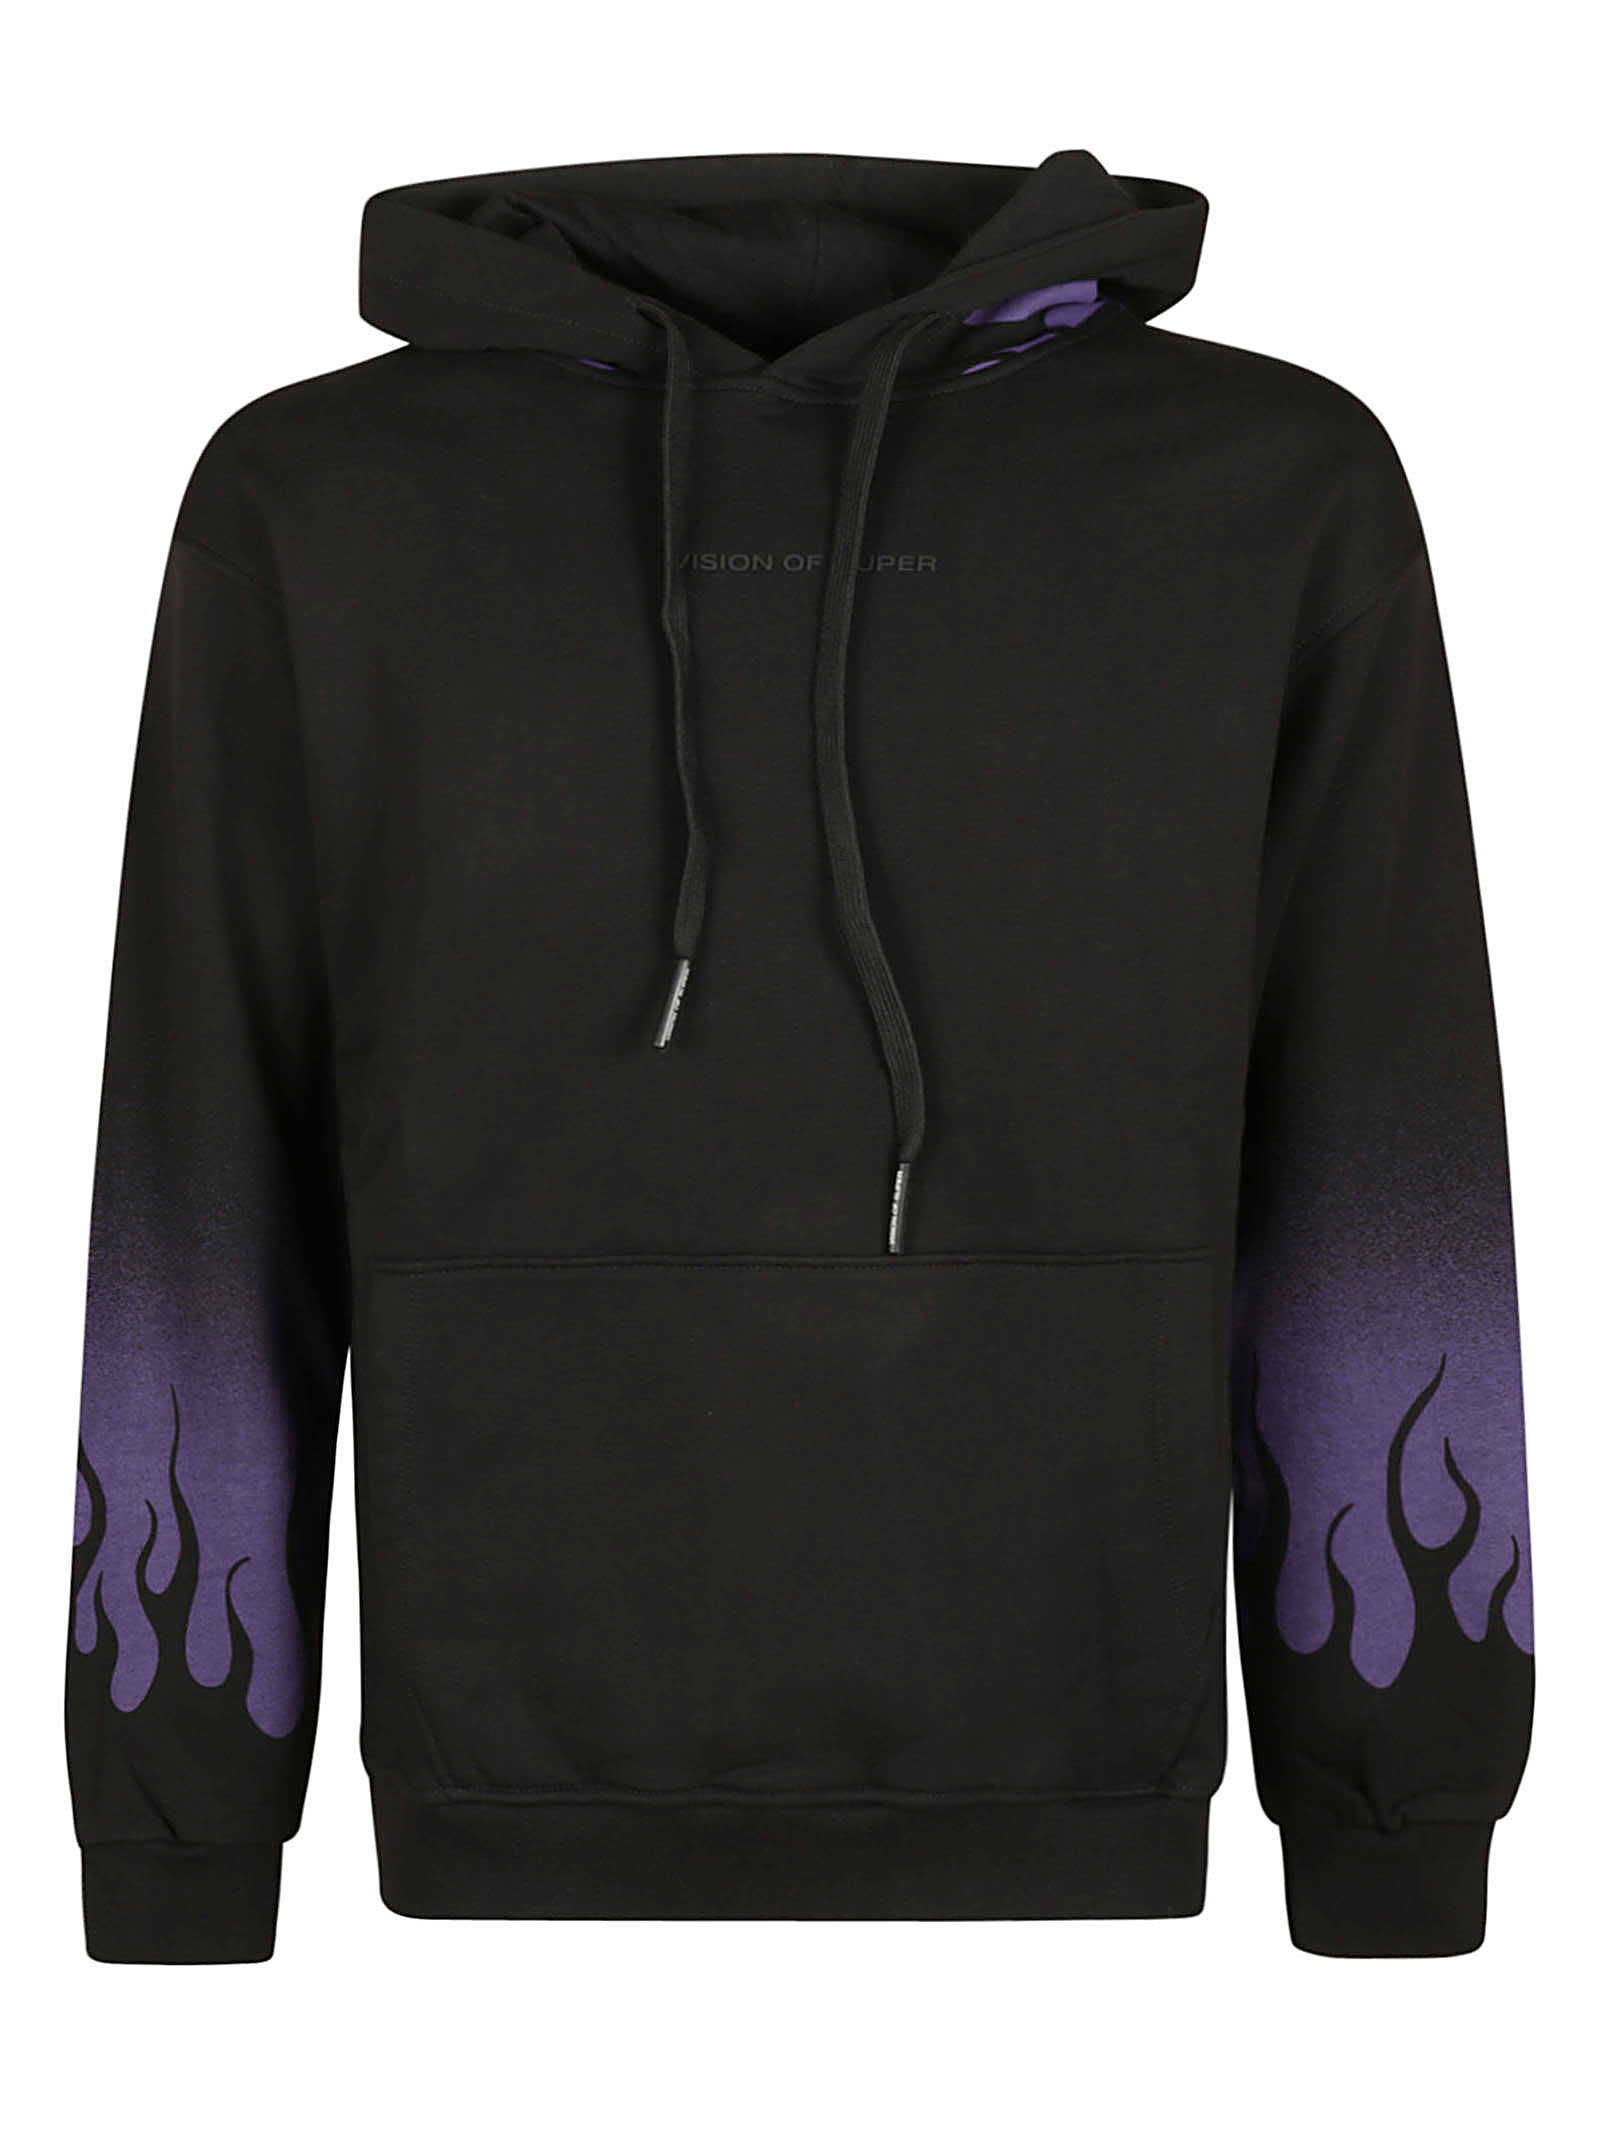 Vision of Super Flame Effect Logo Embroidered Hoodie